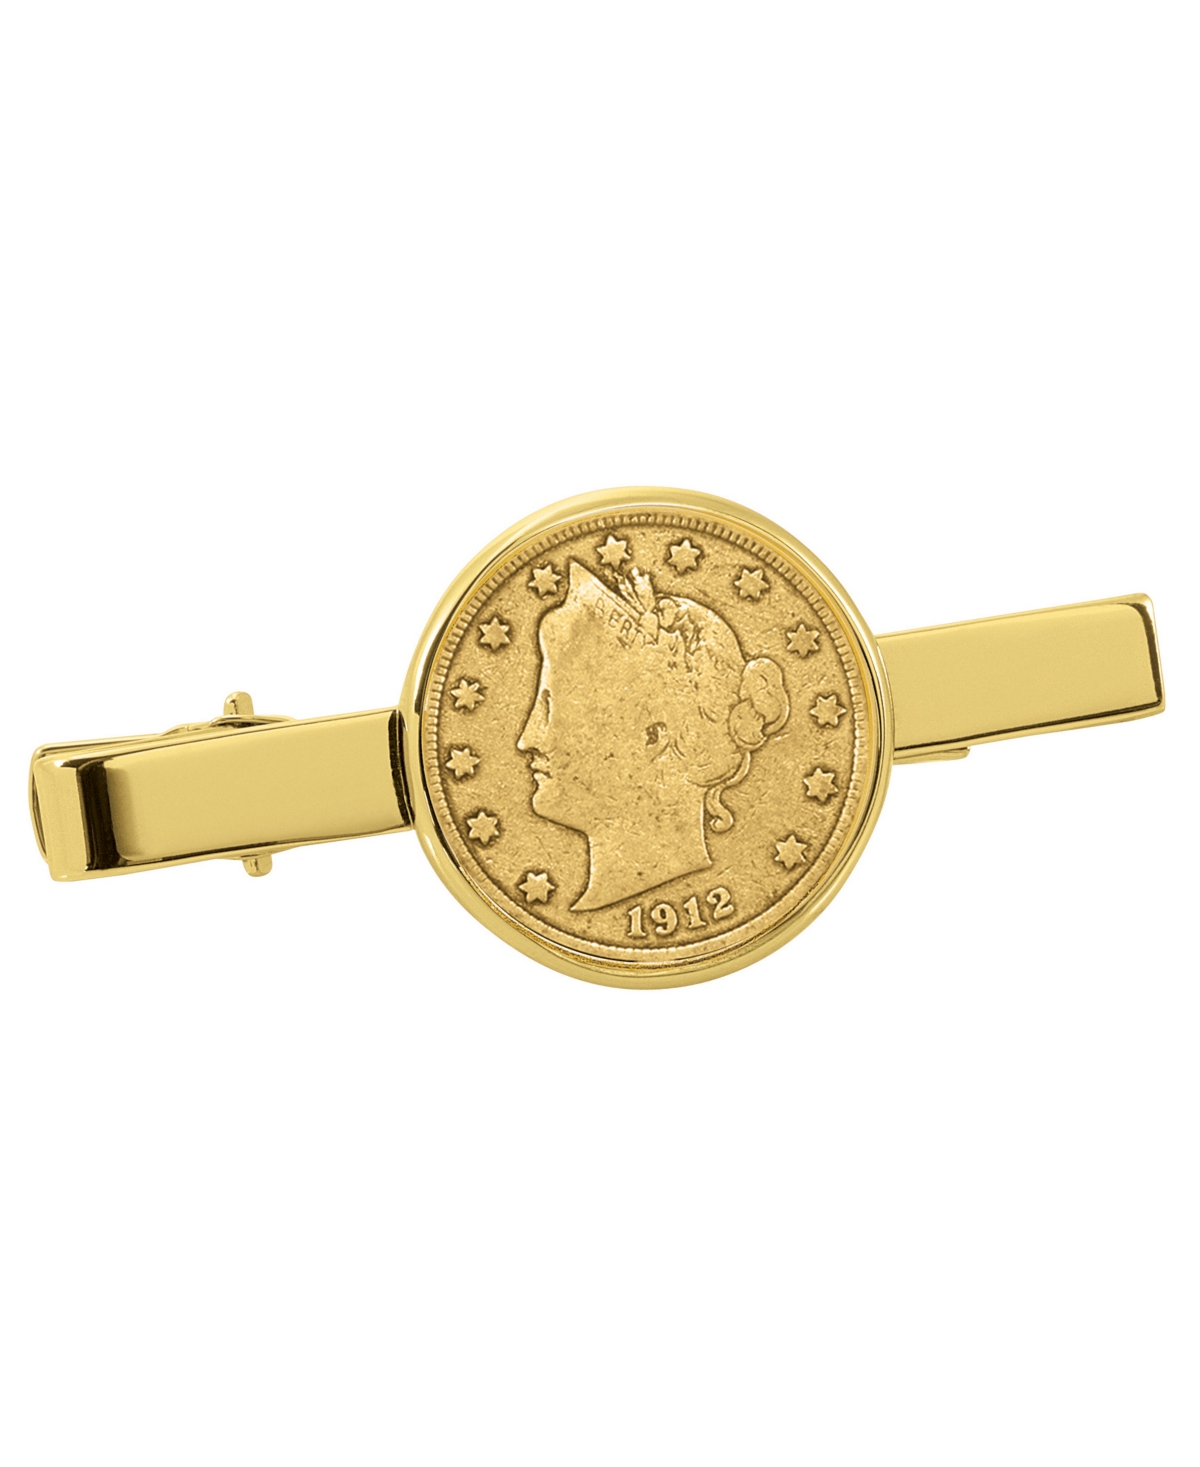 Gold-Layered Liberty Nickel Coin Tie Clip - Gold